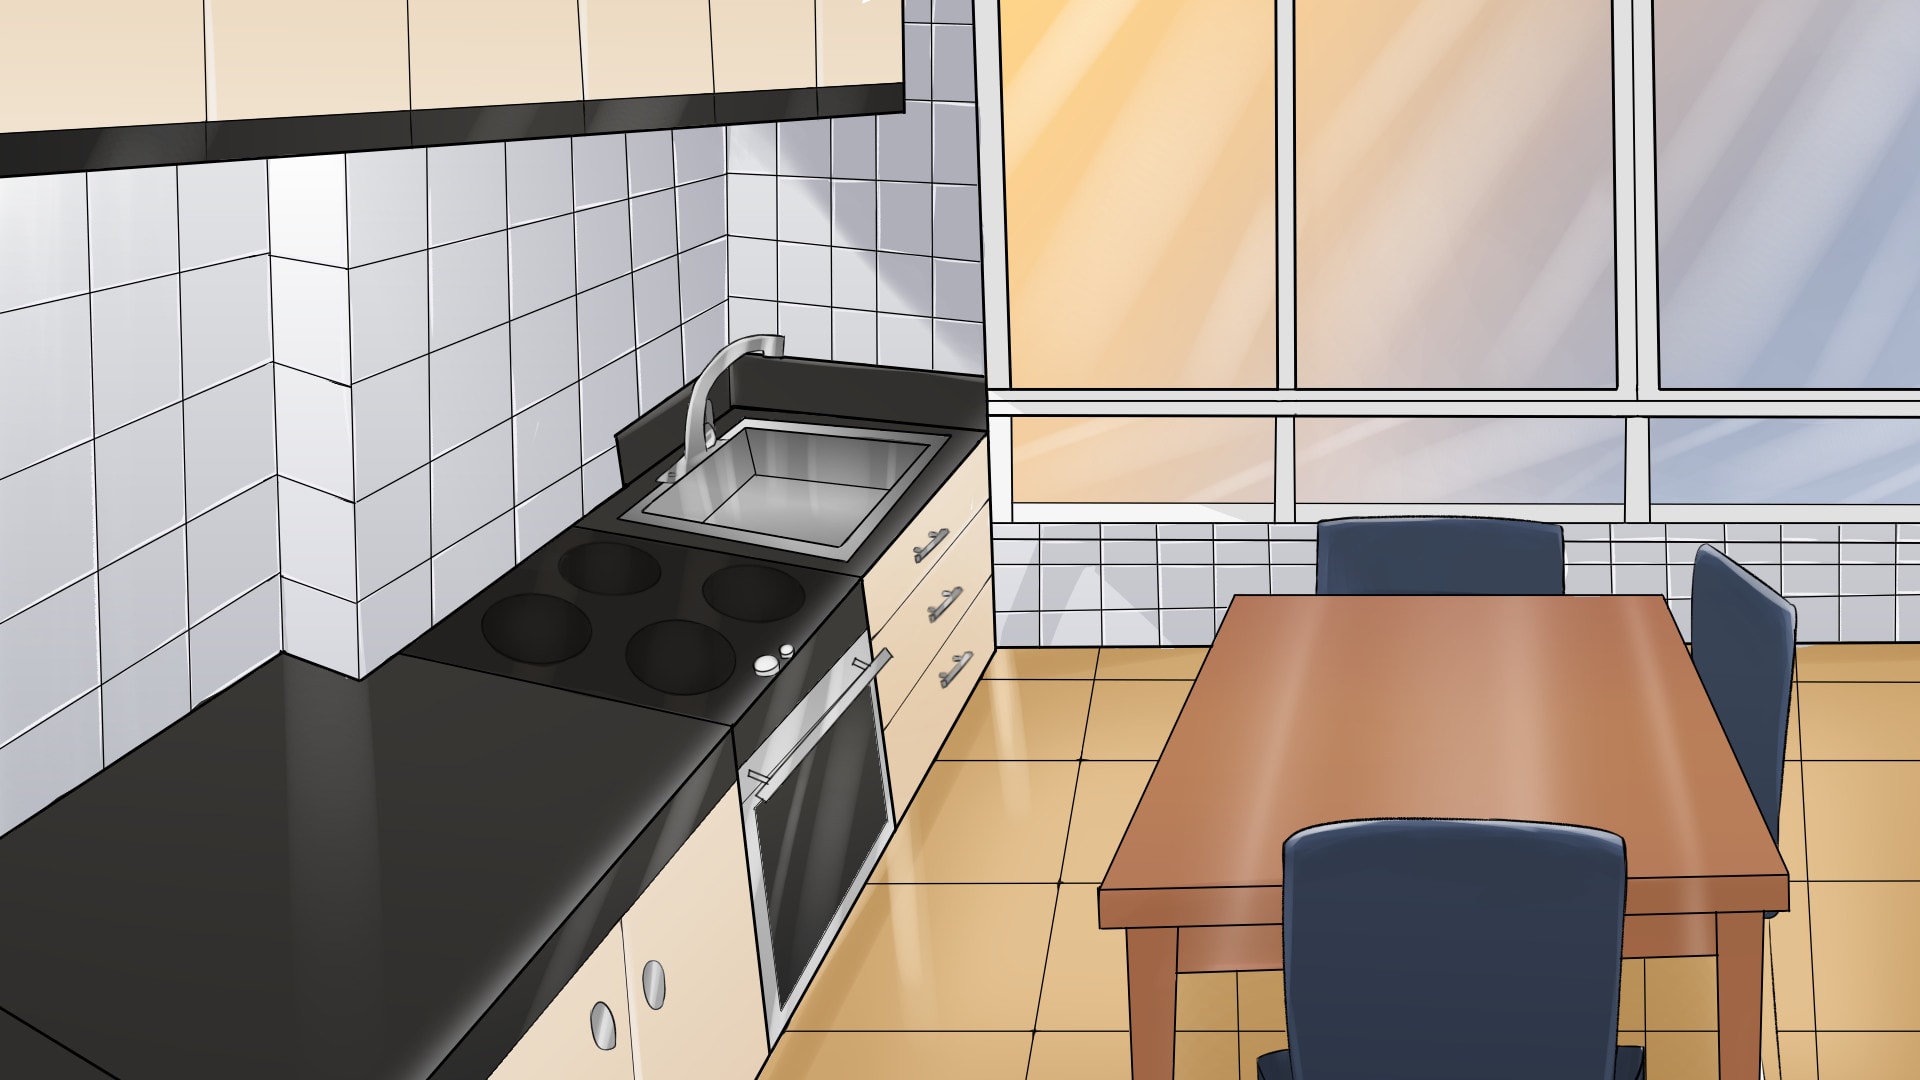 Visual novel background anime style game by Hxmmmm | Fiverr